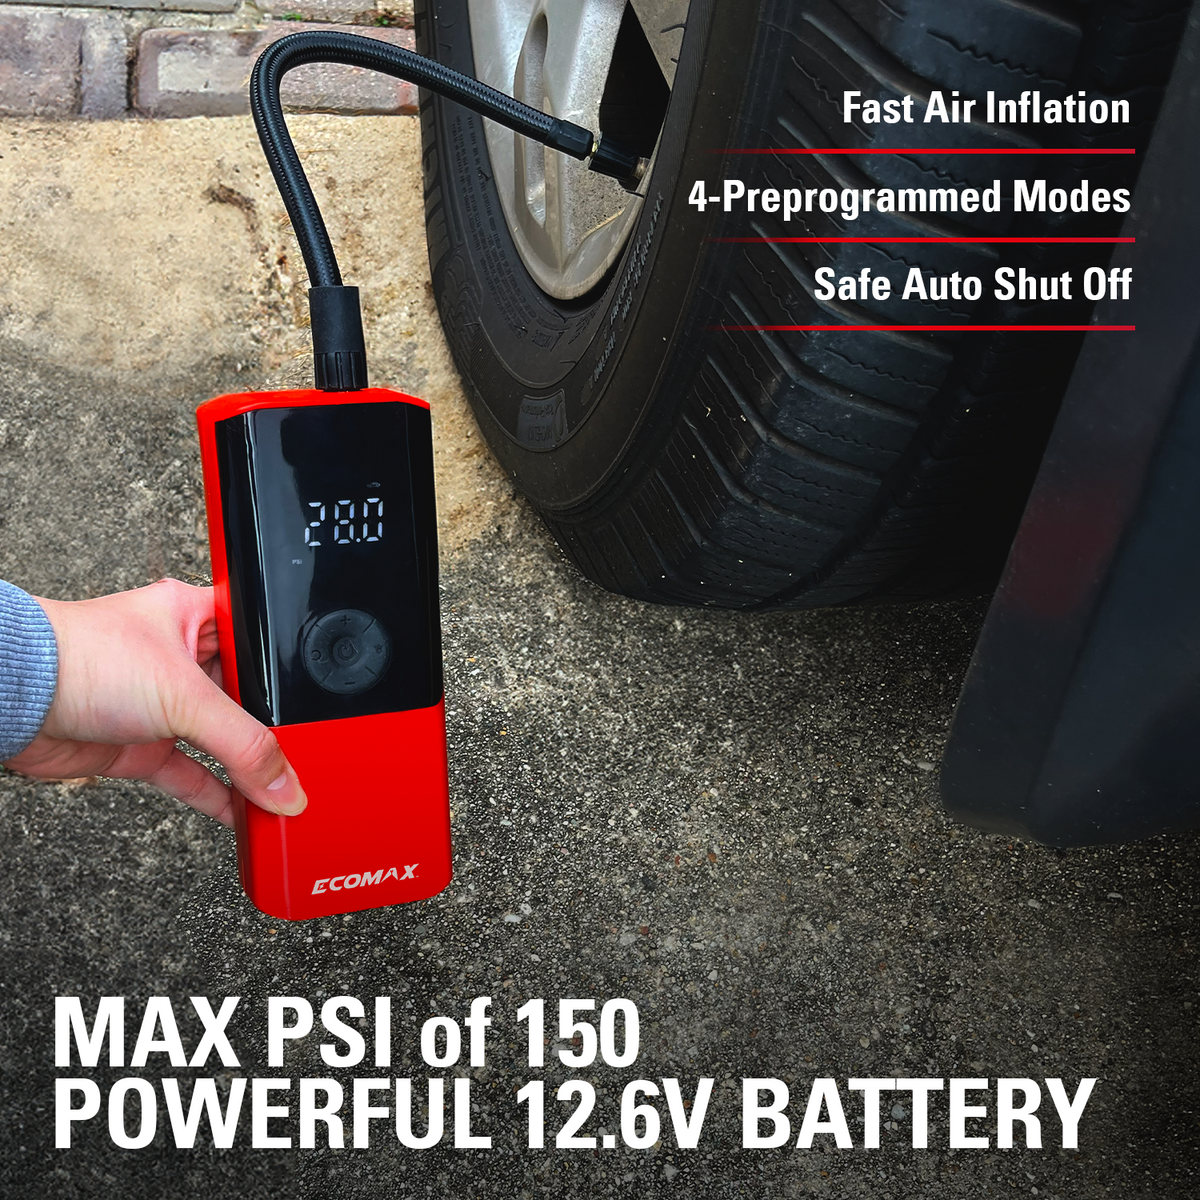 Ecomax 12.6 Volt Portable Digital Cordless Inflator for Tires up to 150 PSI with Auto-Stop